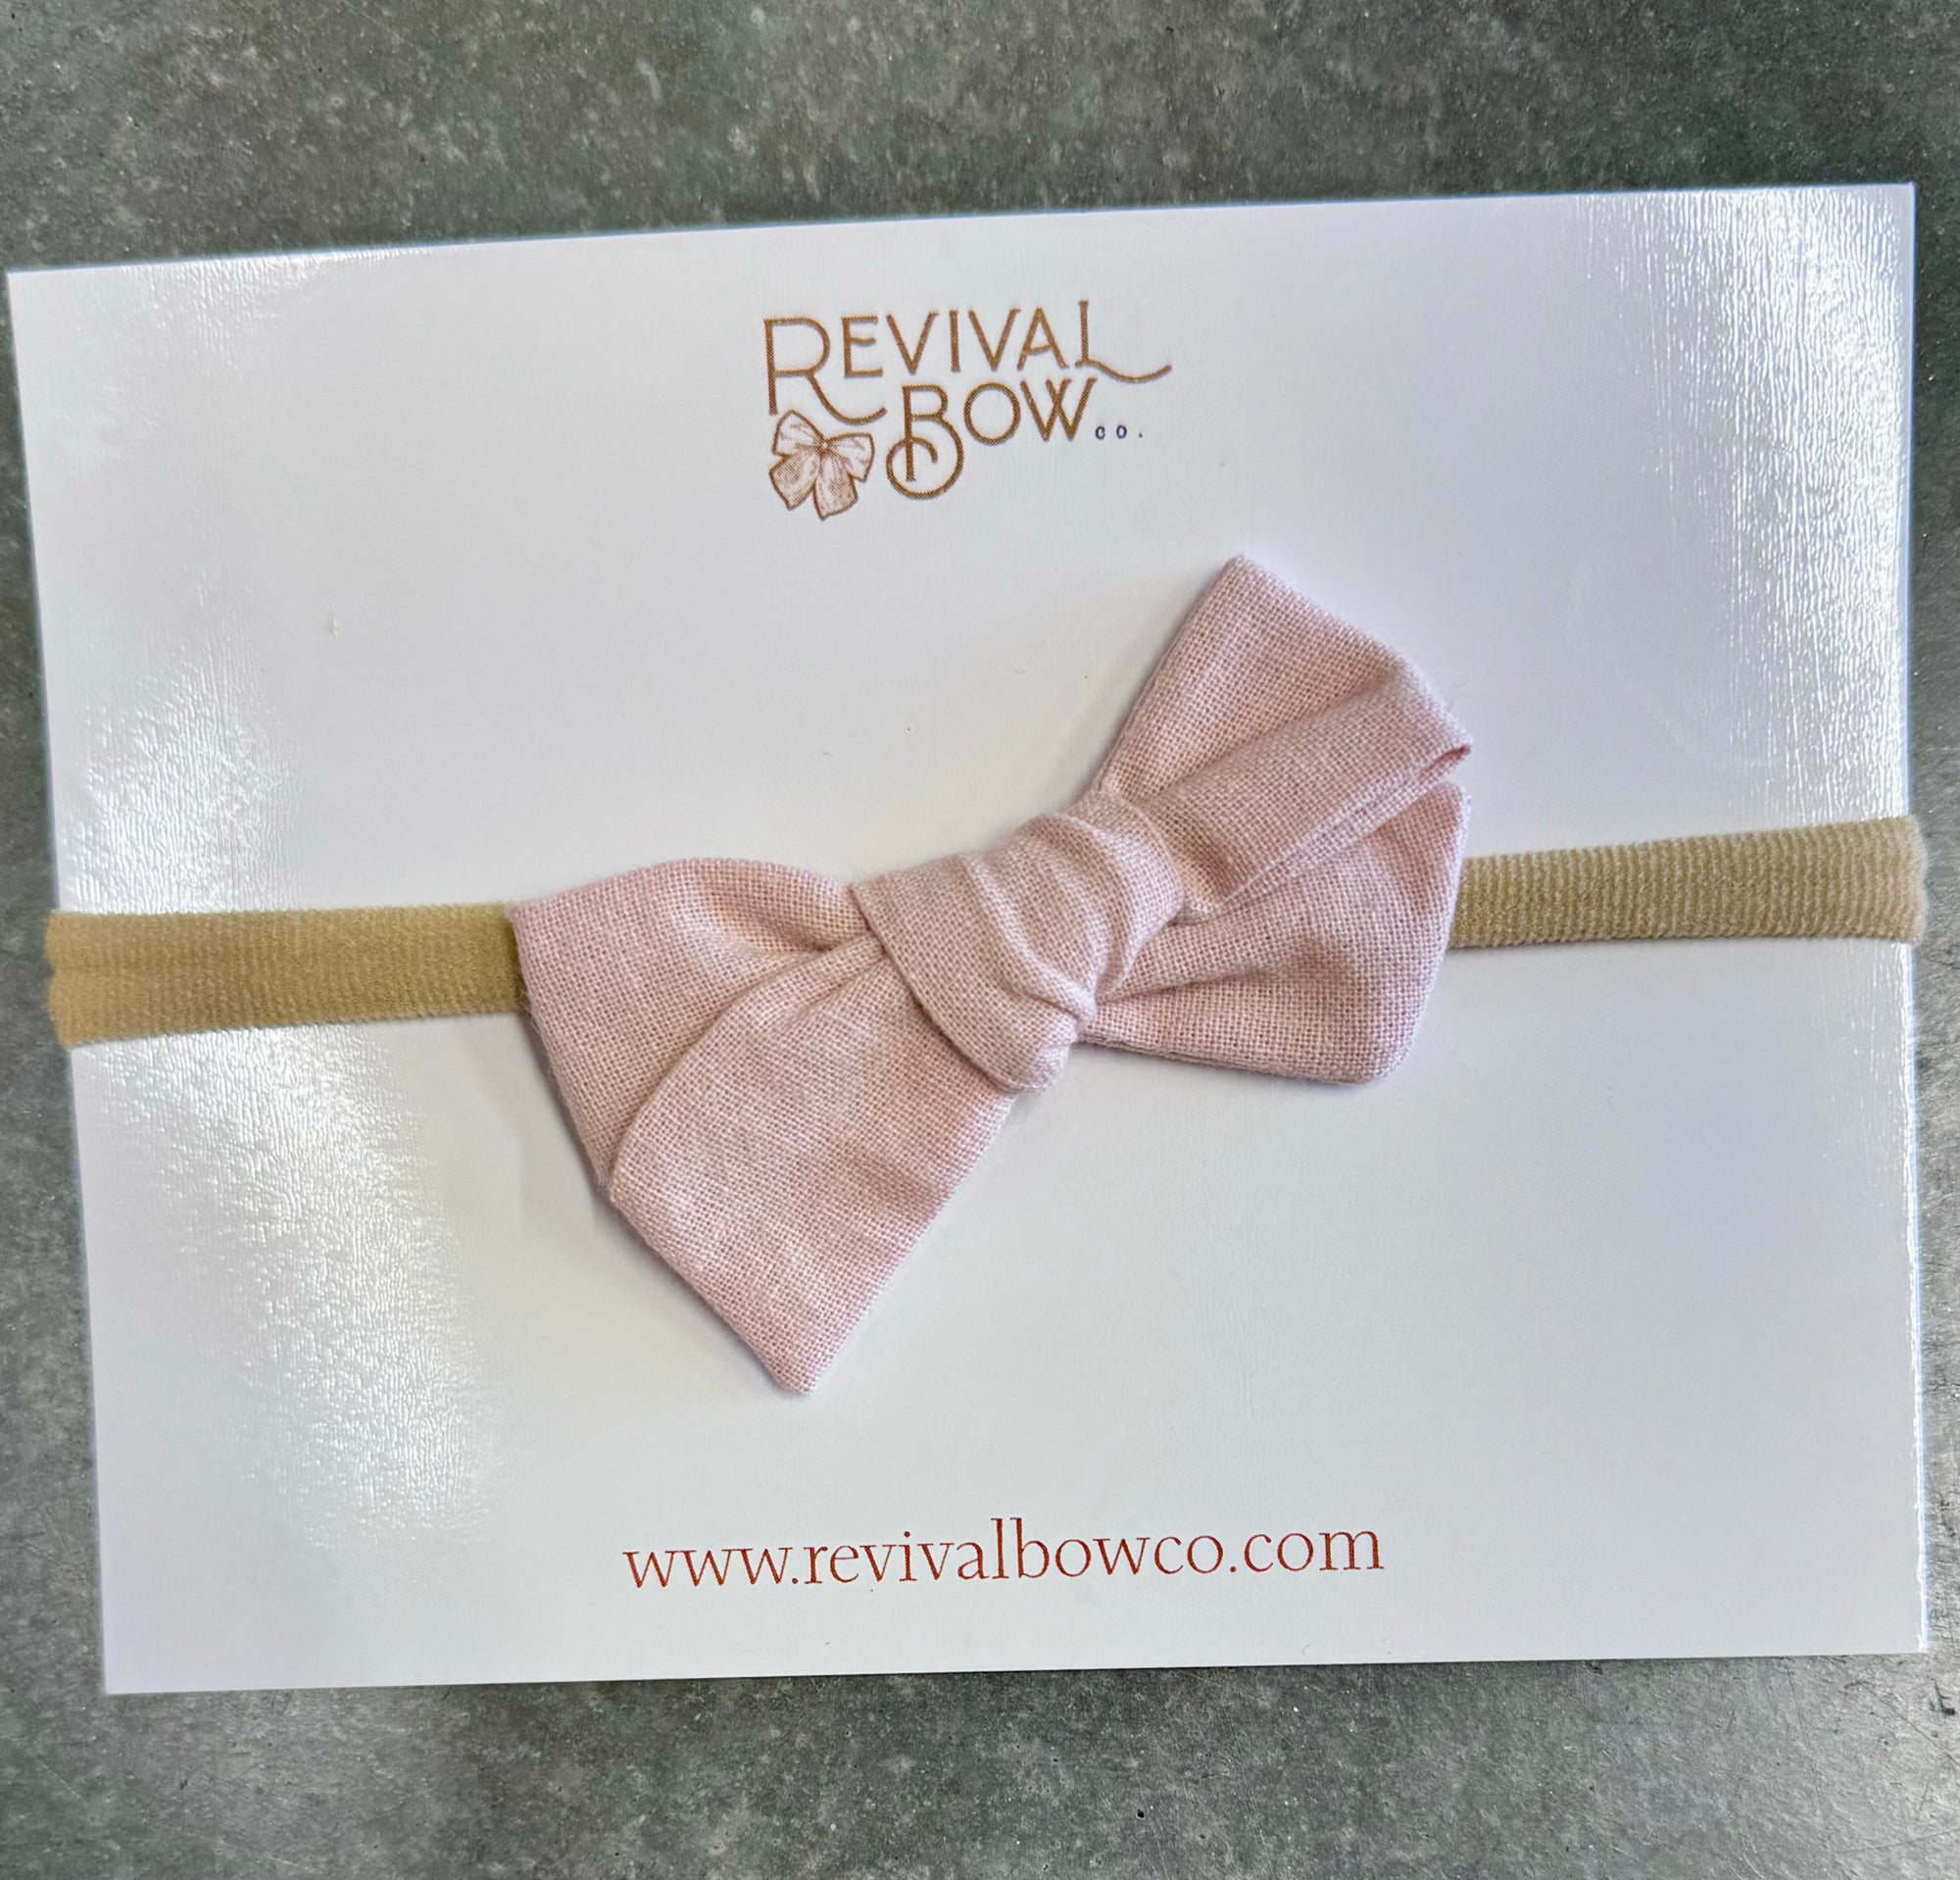 Revival Bow Co. Mini Hand Tied Baby Bow - Neutral Pink